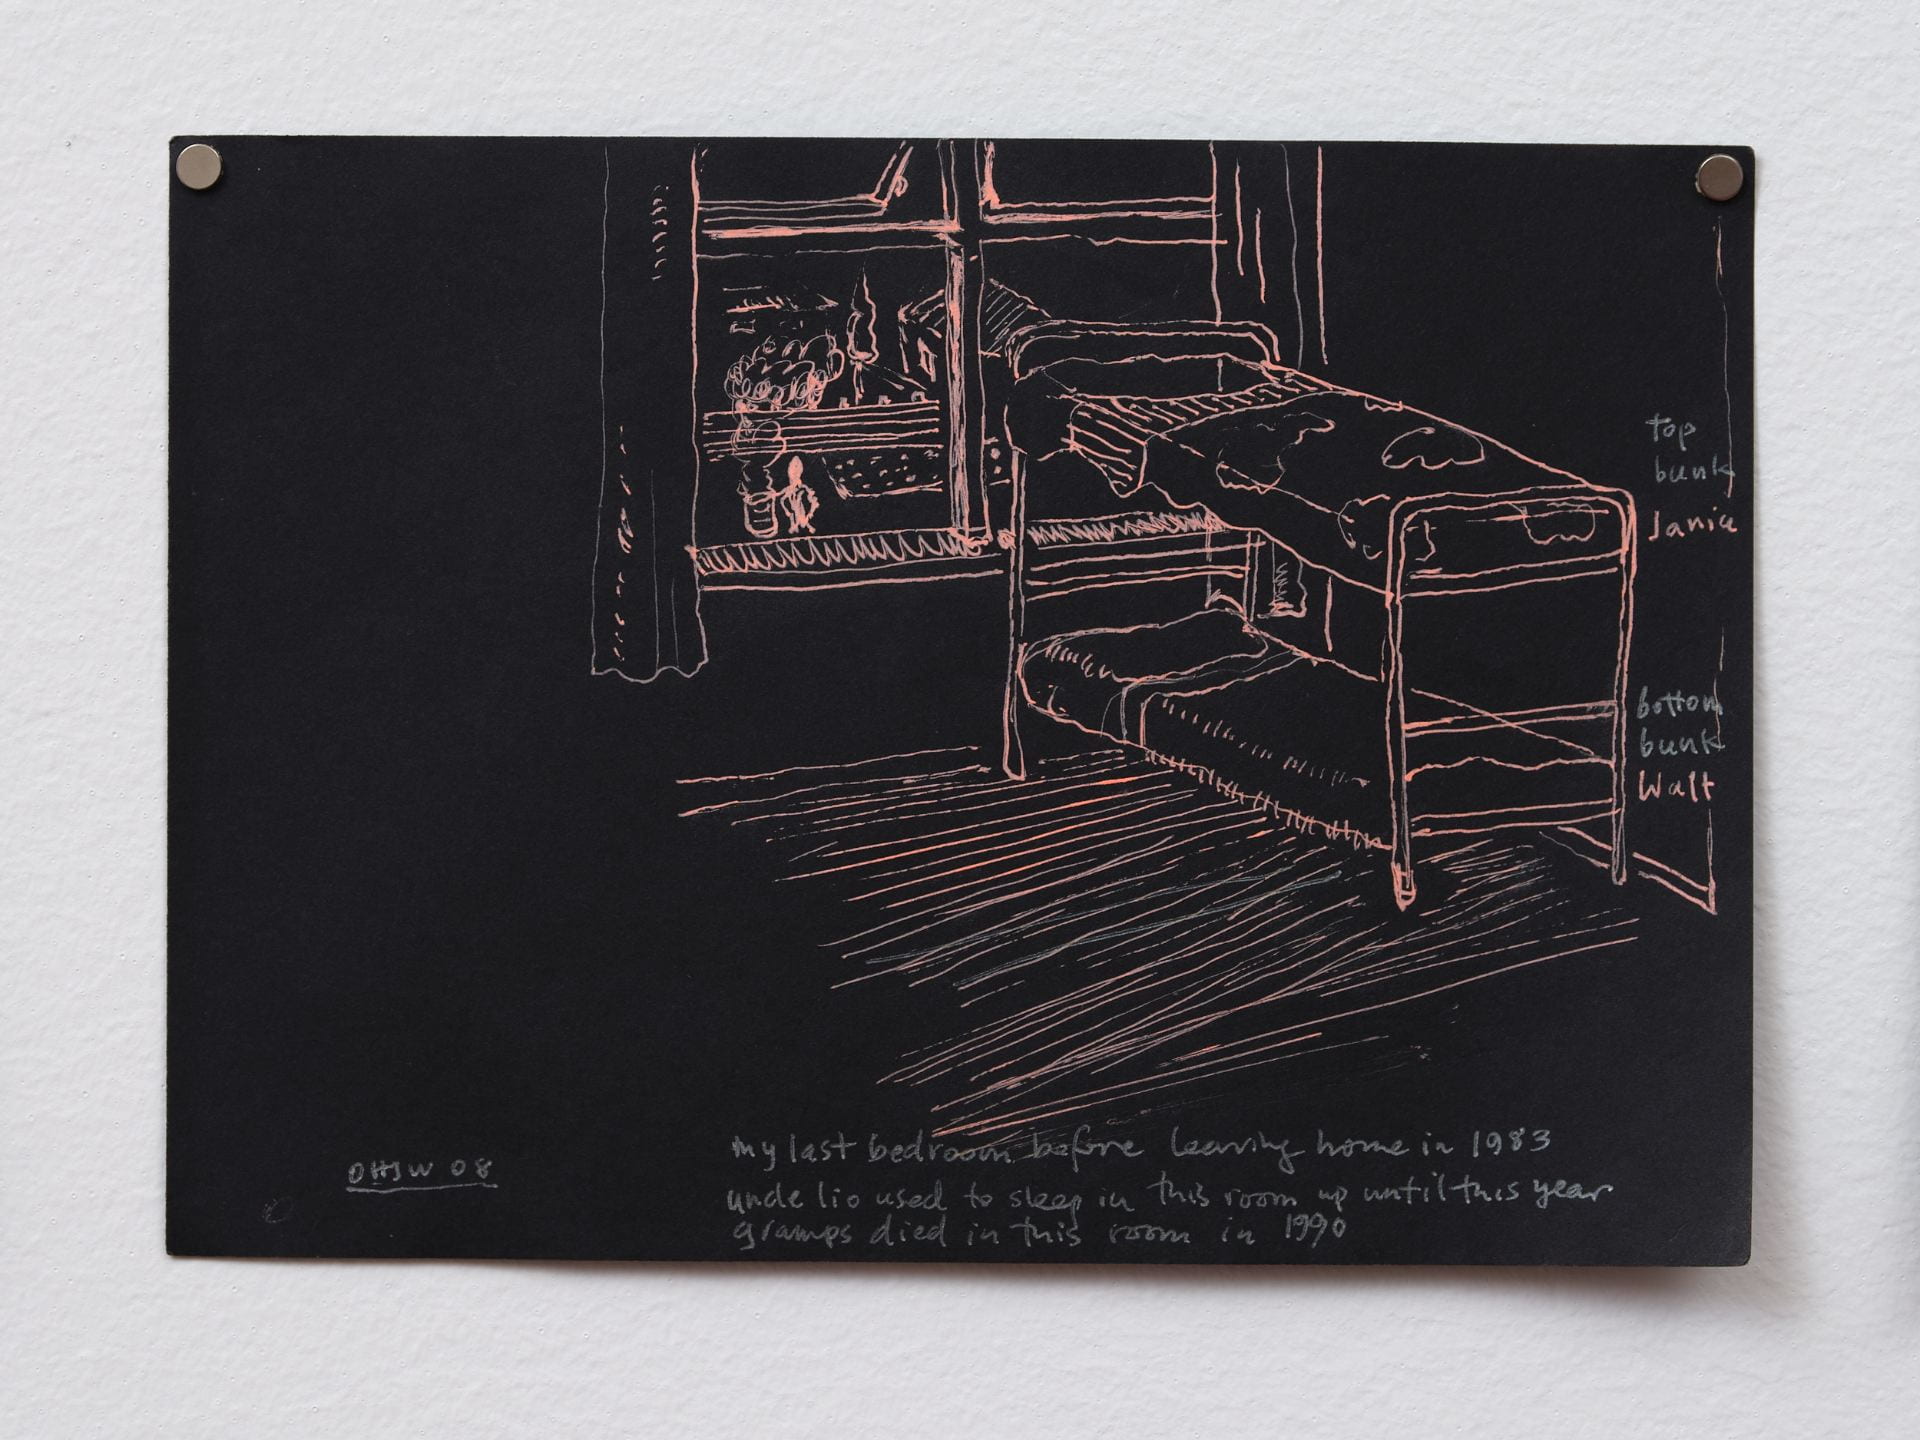 A small drawing using golden ink on black paper. The drawing depicts a bedroom with bunk beds and a window.